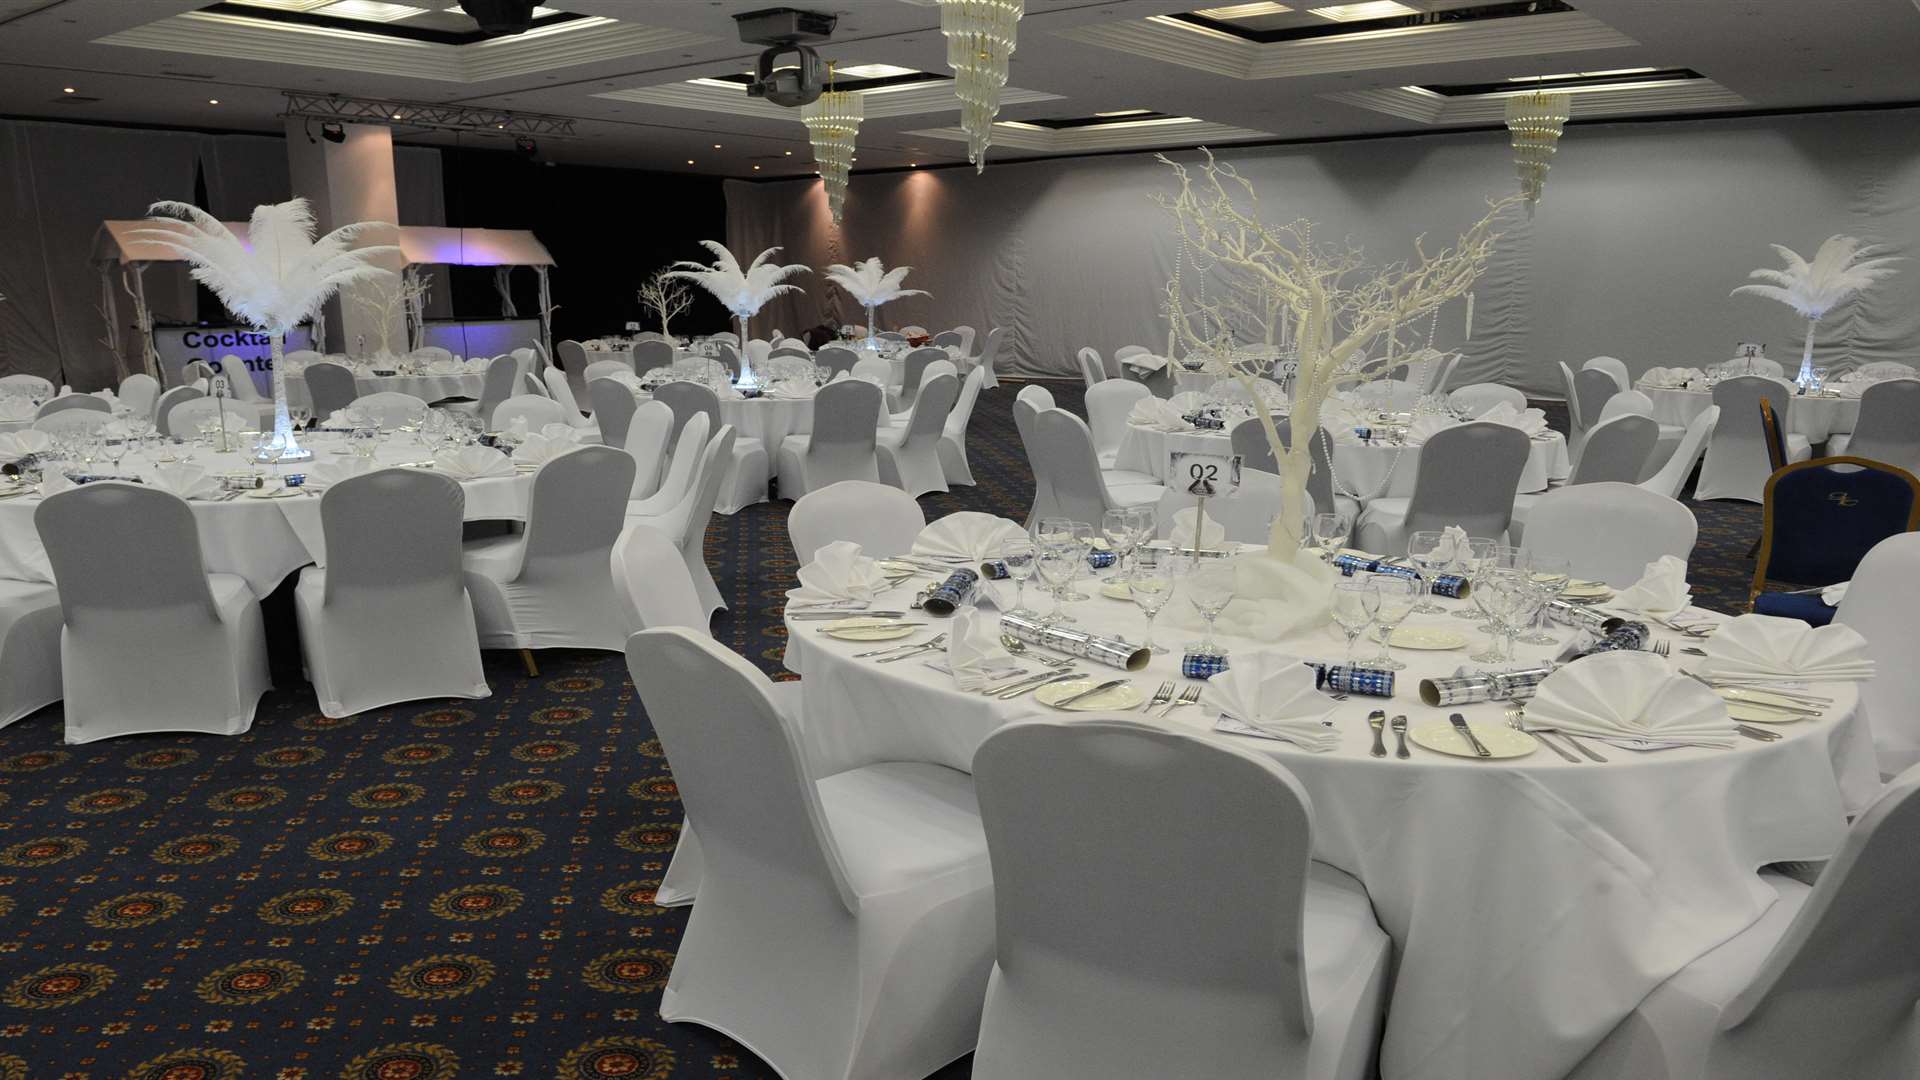 Gillingham host weddings, parties and conferences at their Priestfield venue Picture: Steve Crispe